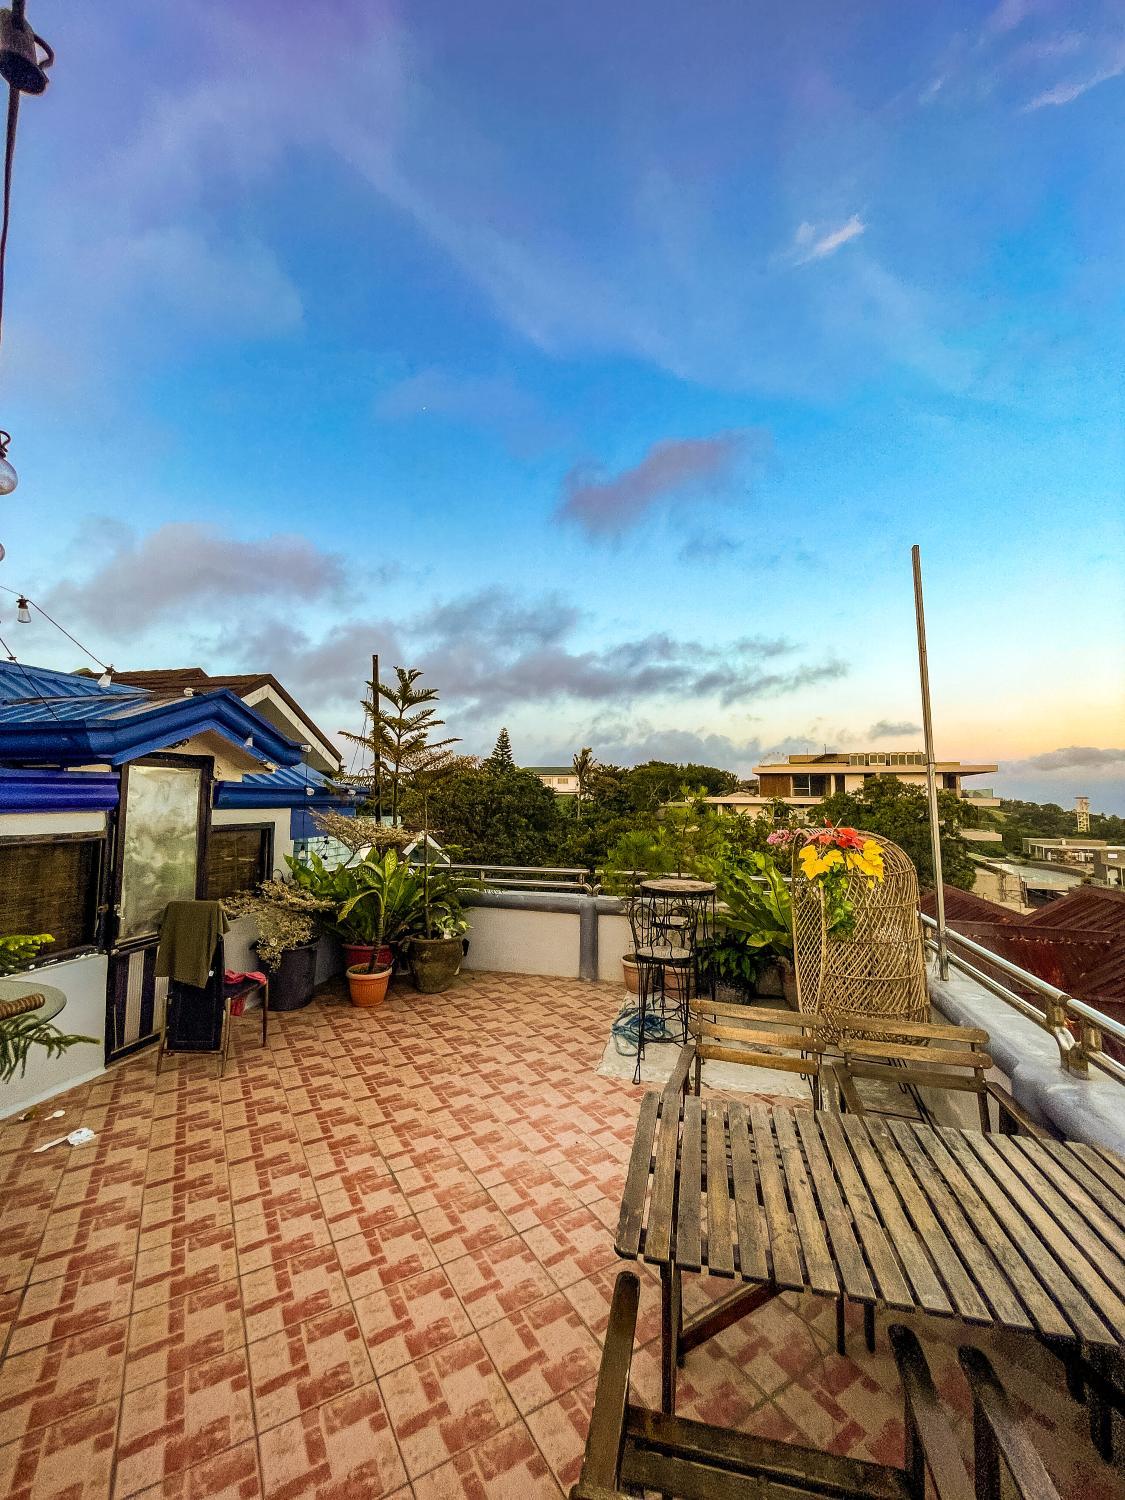 Lovely Villa in Tagaytay with Pool & Full Taal View, Tagaytay City